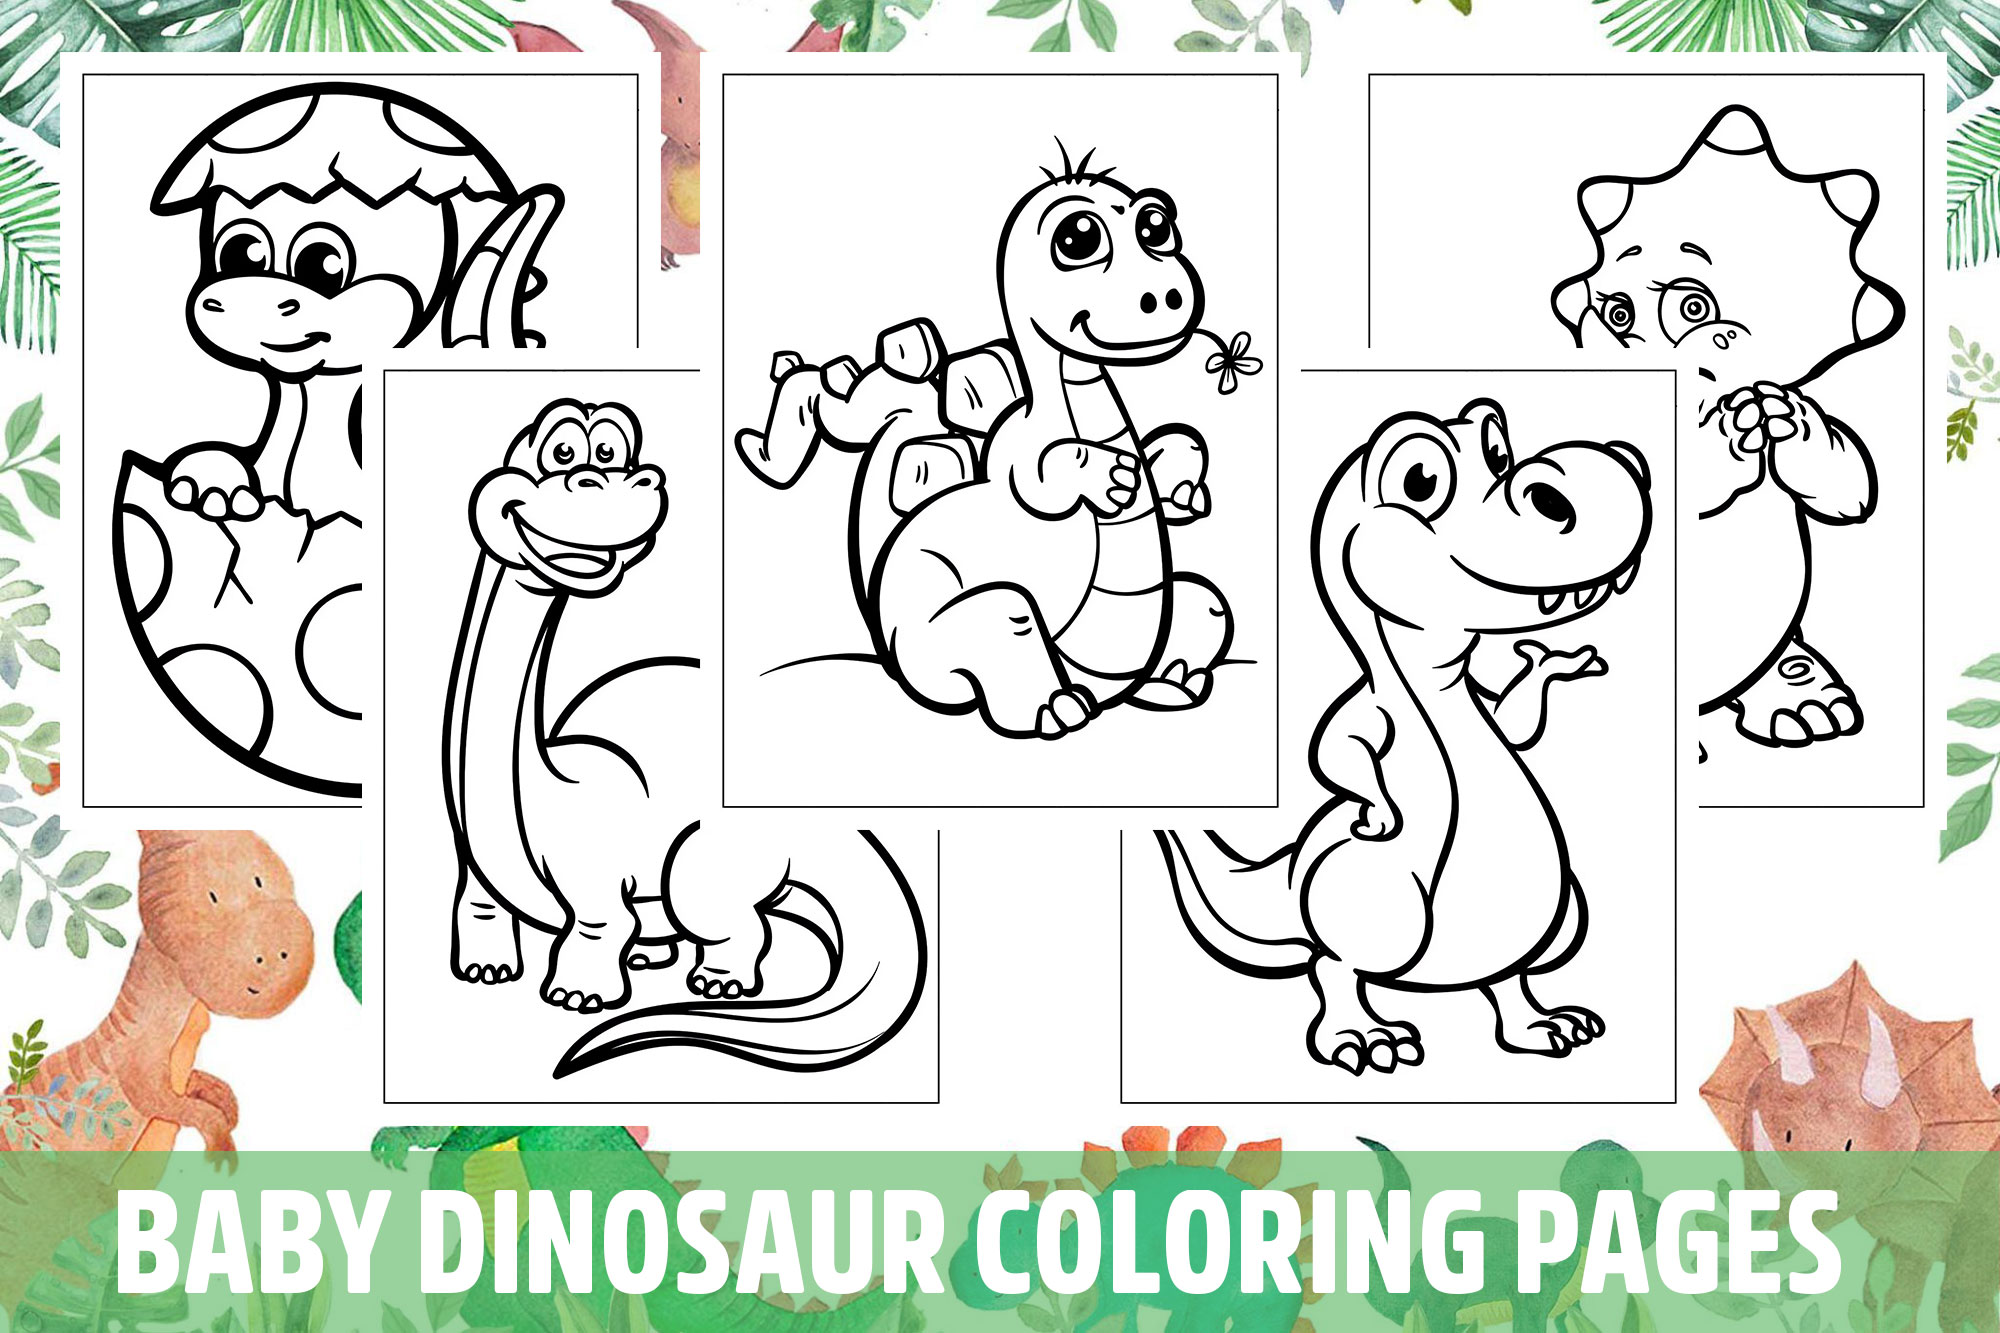 Baby dinosaur coloring pages for kids girls boys teens birthday school activity made by teachers